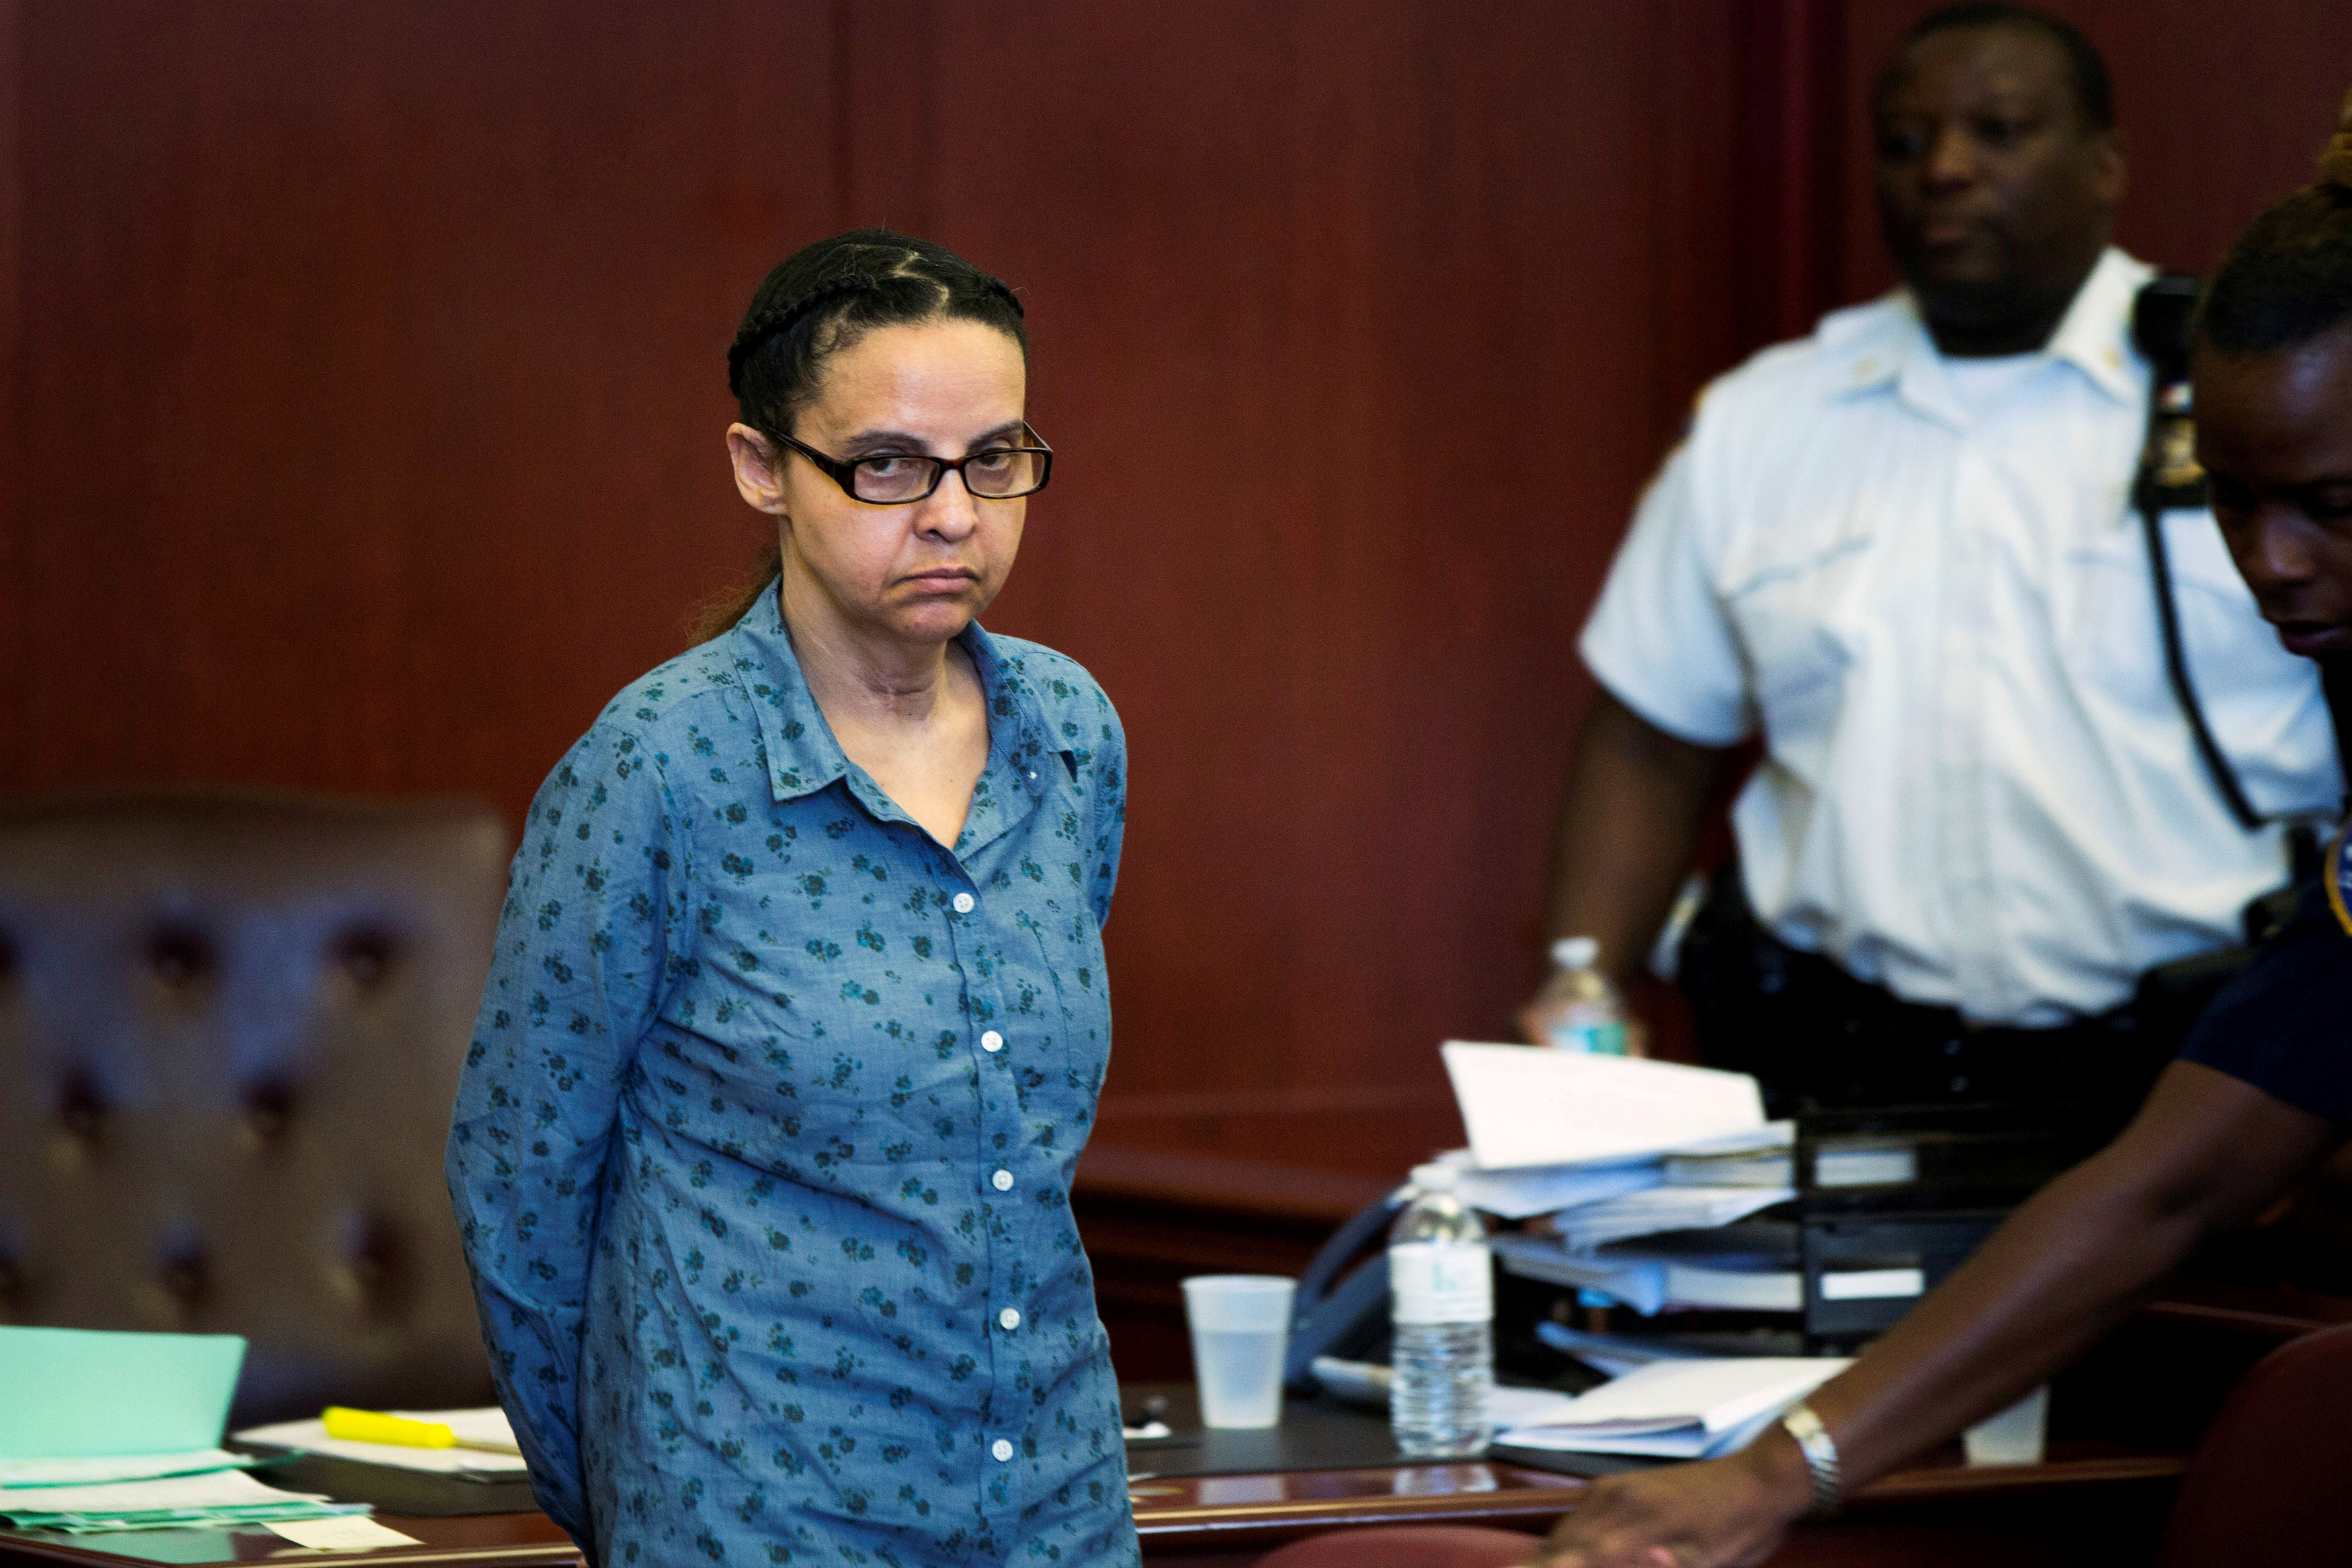 New York nanny faces life in murder of children in her care